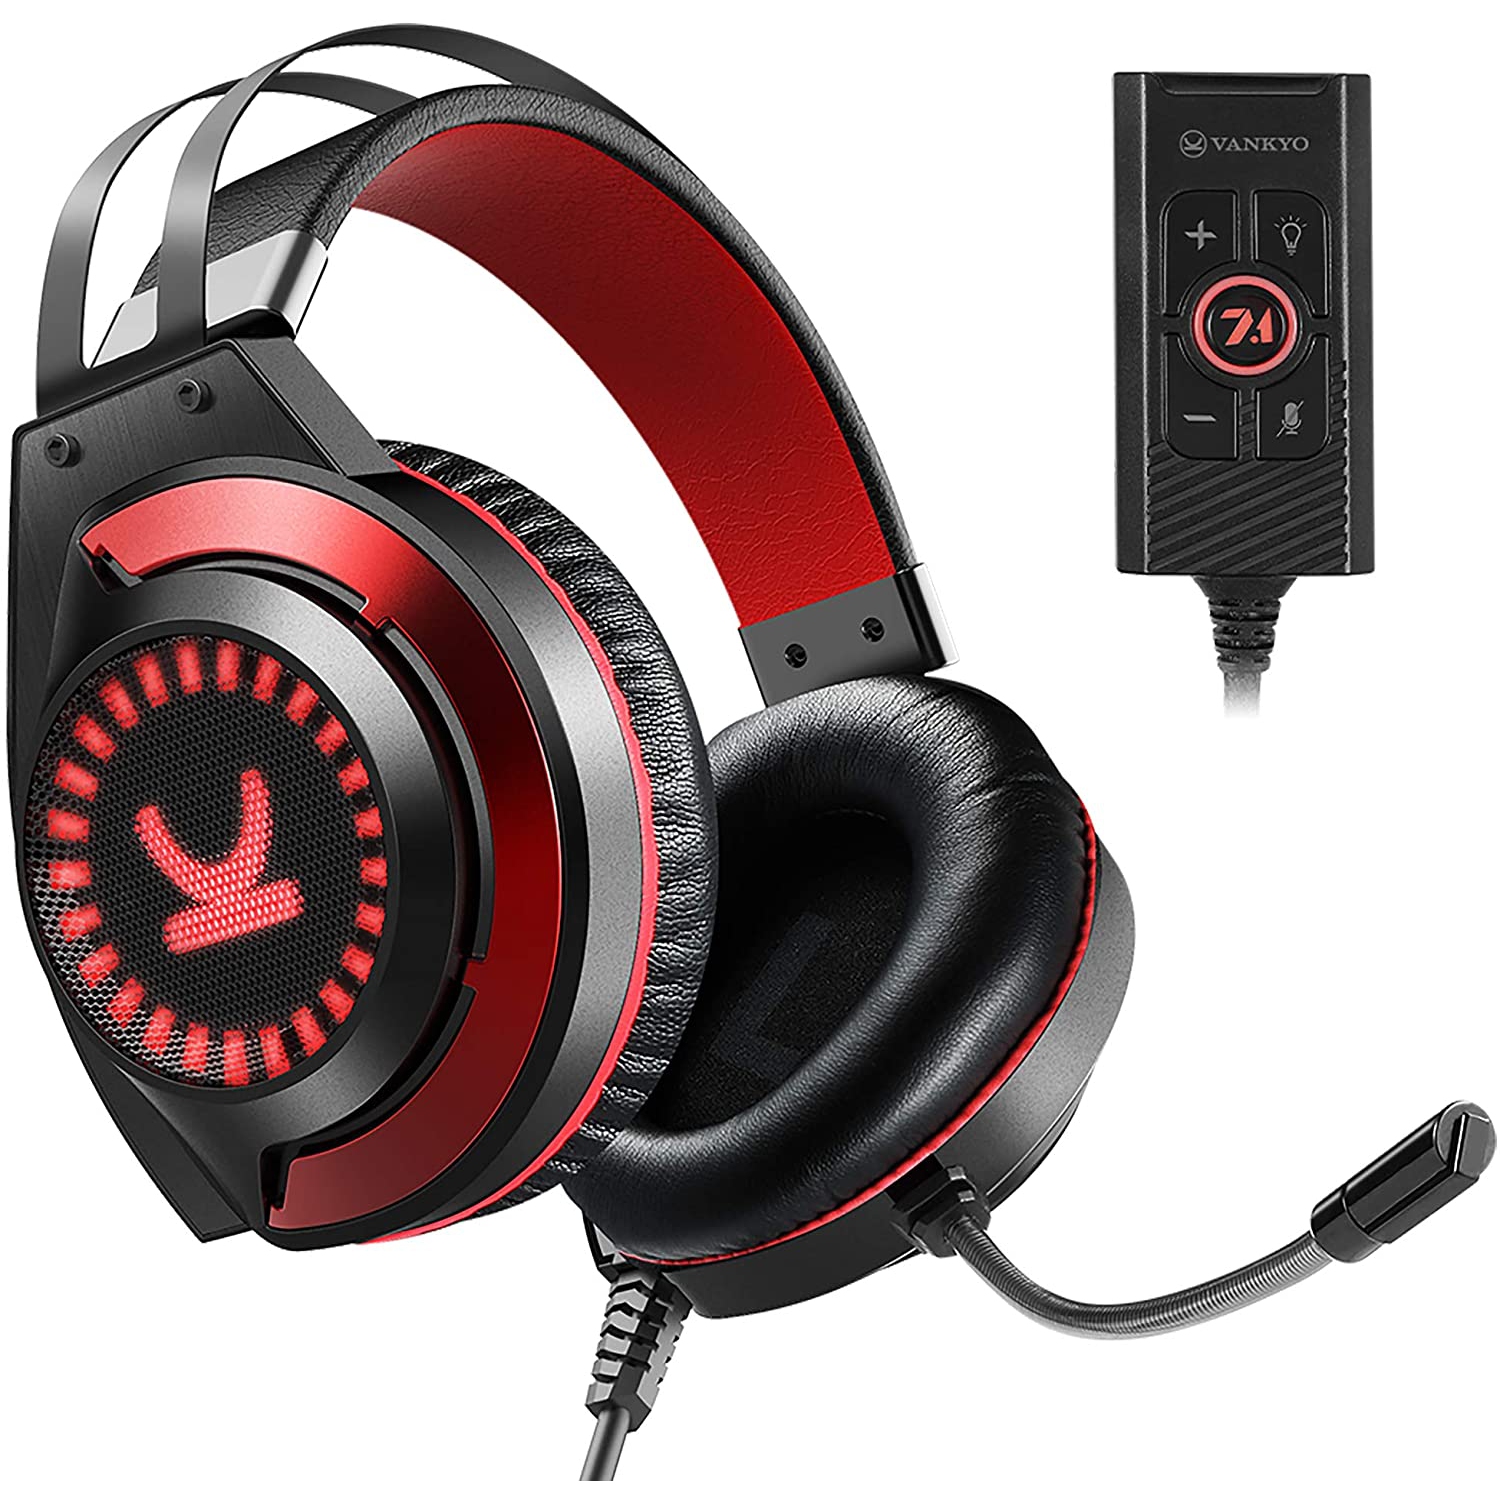 Commander – CM7000 - VANKYO Gaming Headset with 7.1 Surround Sound Stereo - Wired Over Ear Headphone - Xbox One, PS4, PC, Laptop, Nintendo- Noise Cancellation- Red